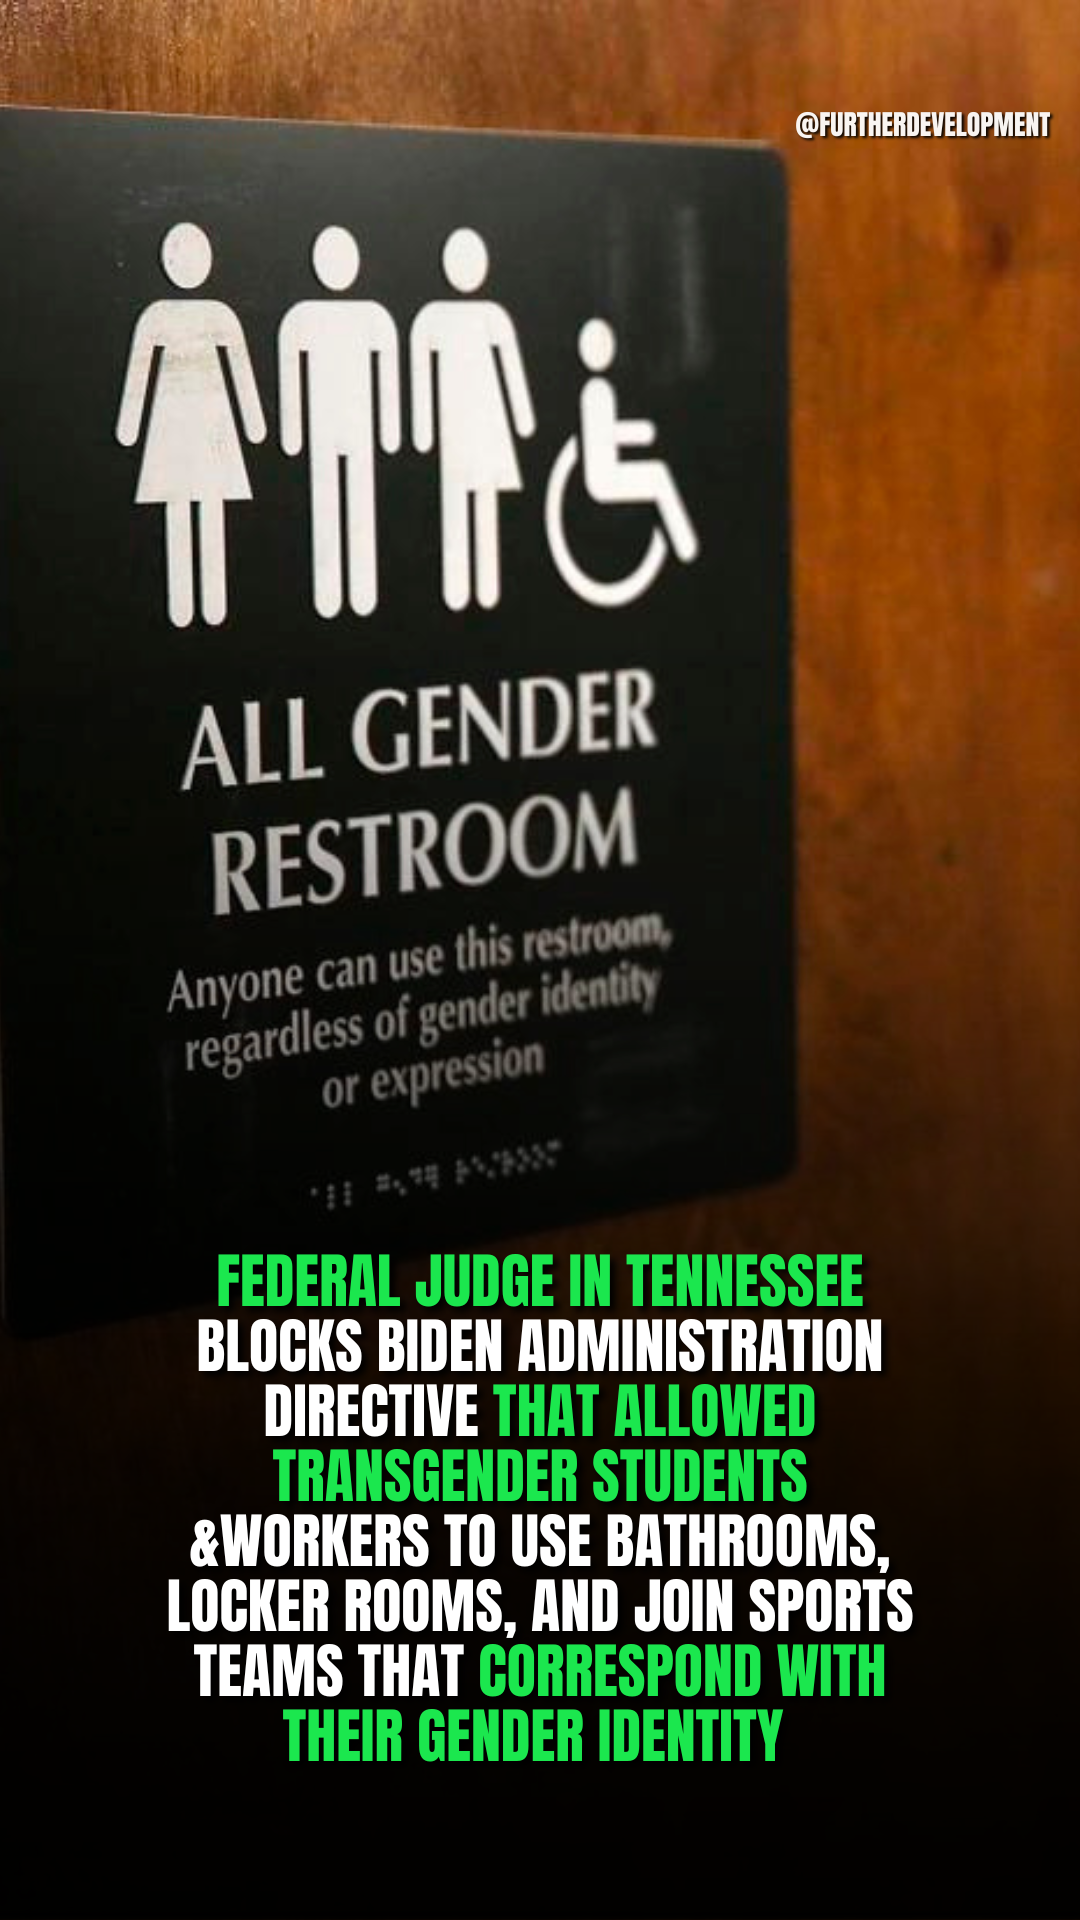 Federal Judge in Tennessee blocks Biden administration directive that allowed transgender students &workers to use bathrooms, locker rooms, and join sports teams that correspond with their gender identity